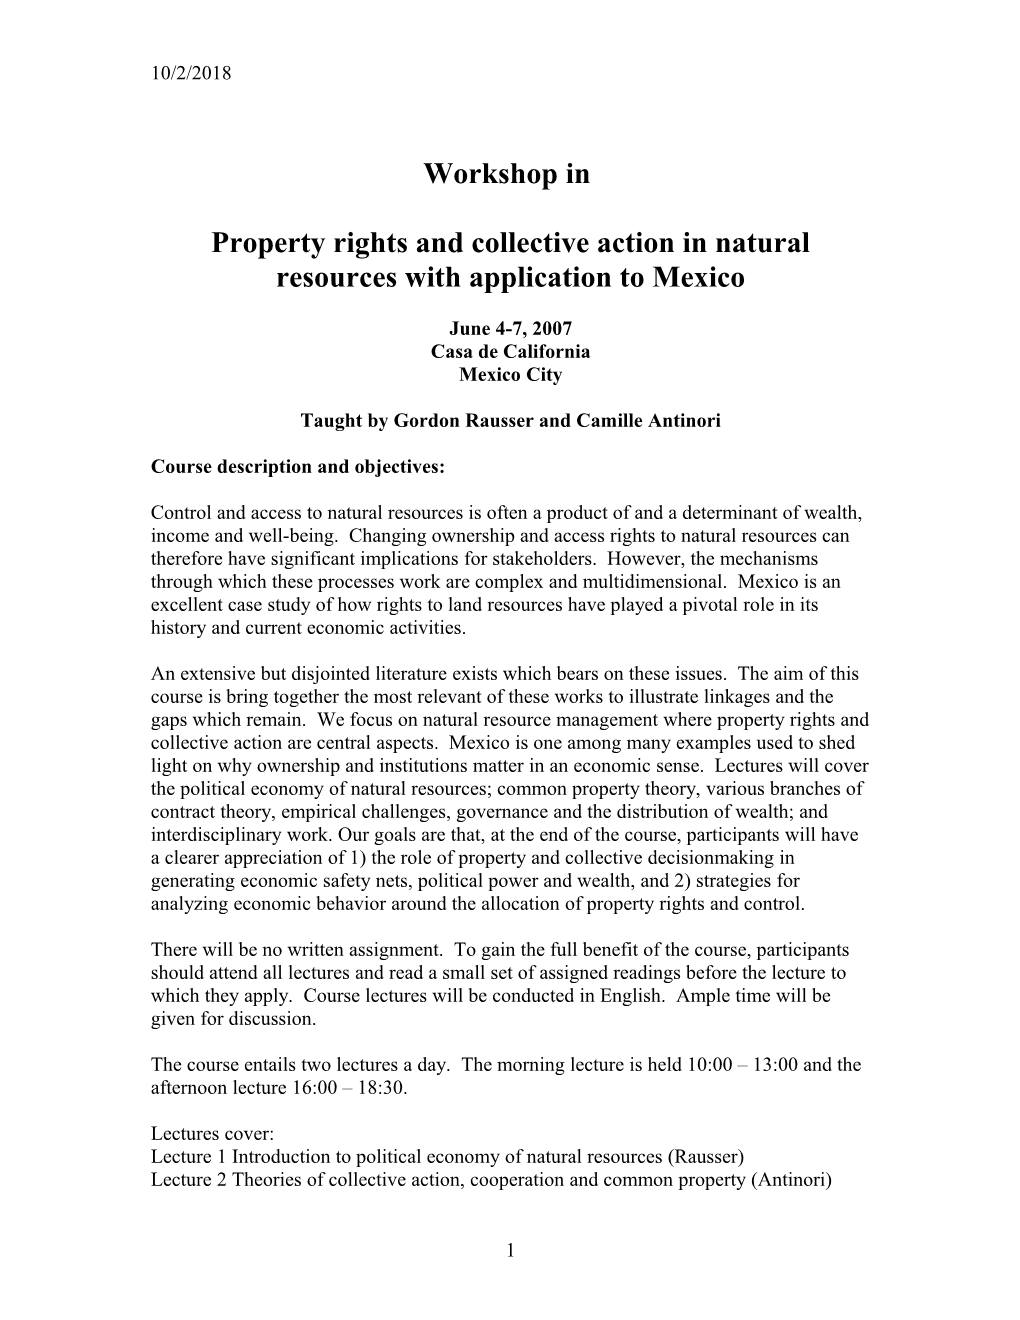 Property Rights and Collective Action in Natural Resources